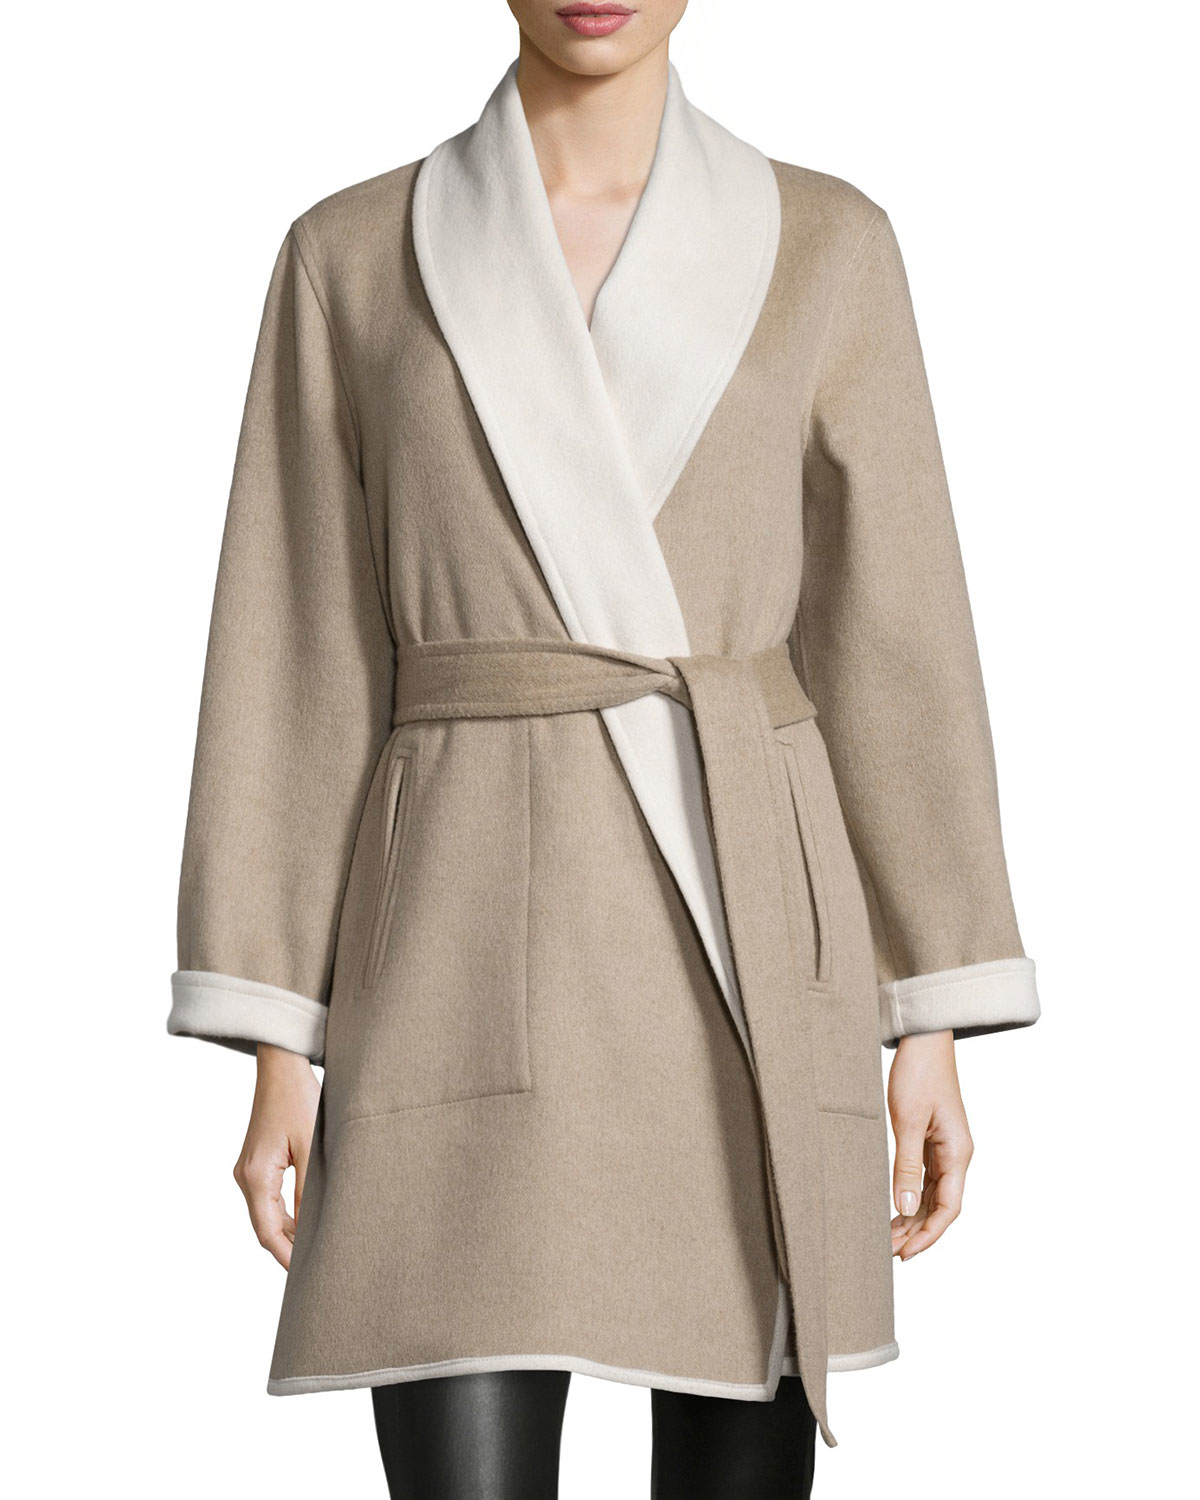 Sofia Cashmere Cashmere Reversible Double-face Wrap Coat in Taupe/Ivory ...